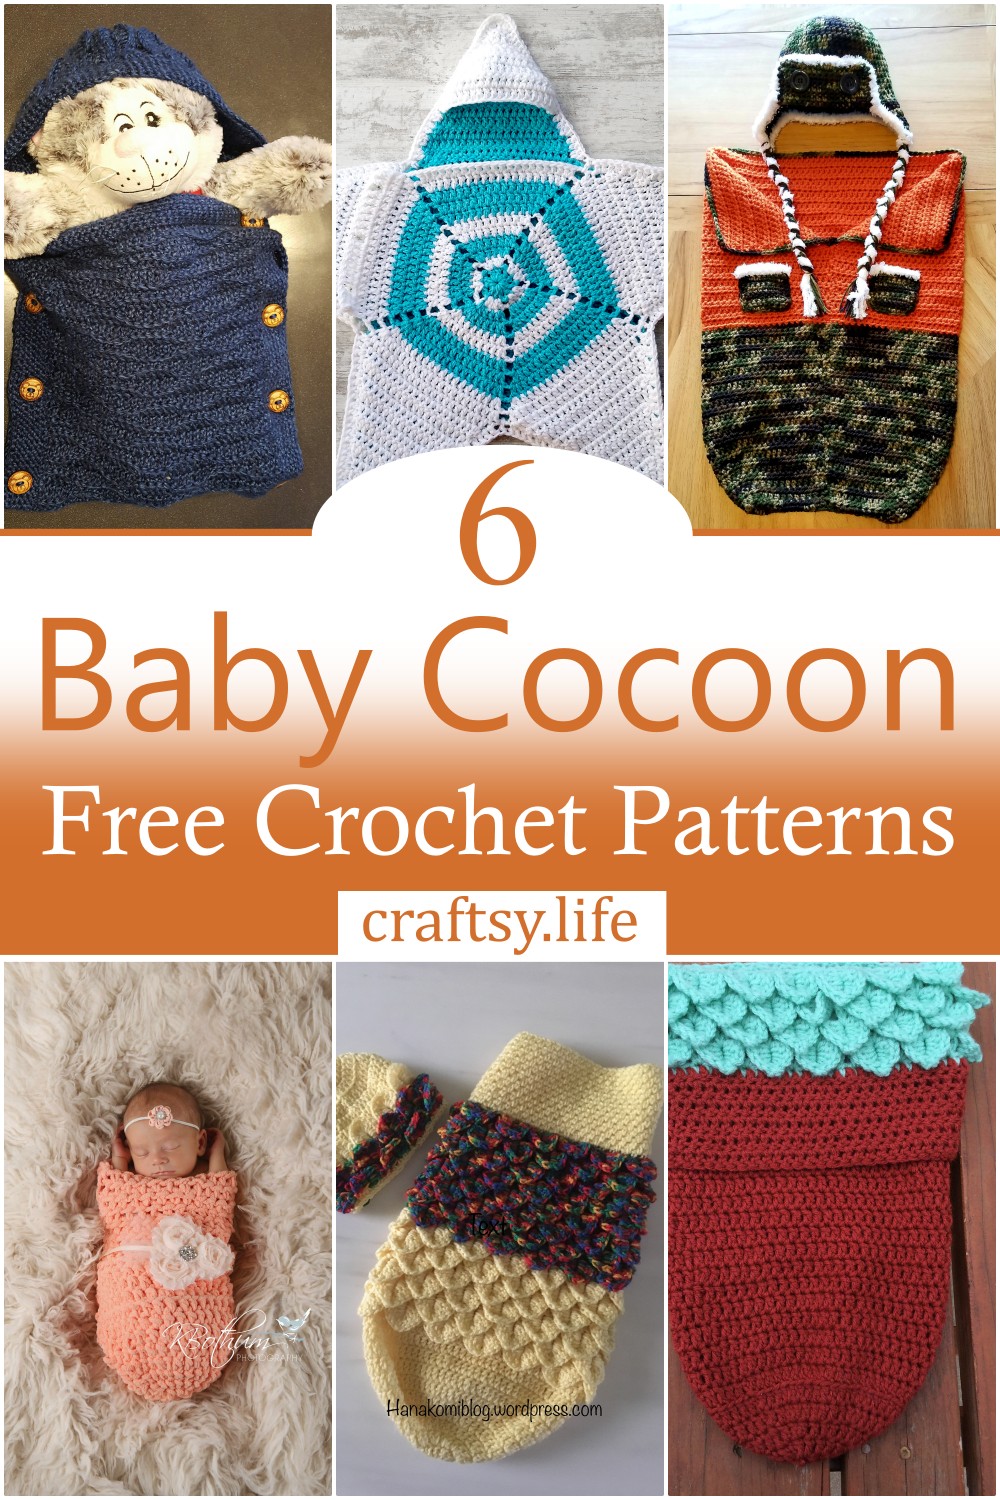 Simple Crochet Baby Cocoon Free Patterns 1